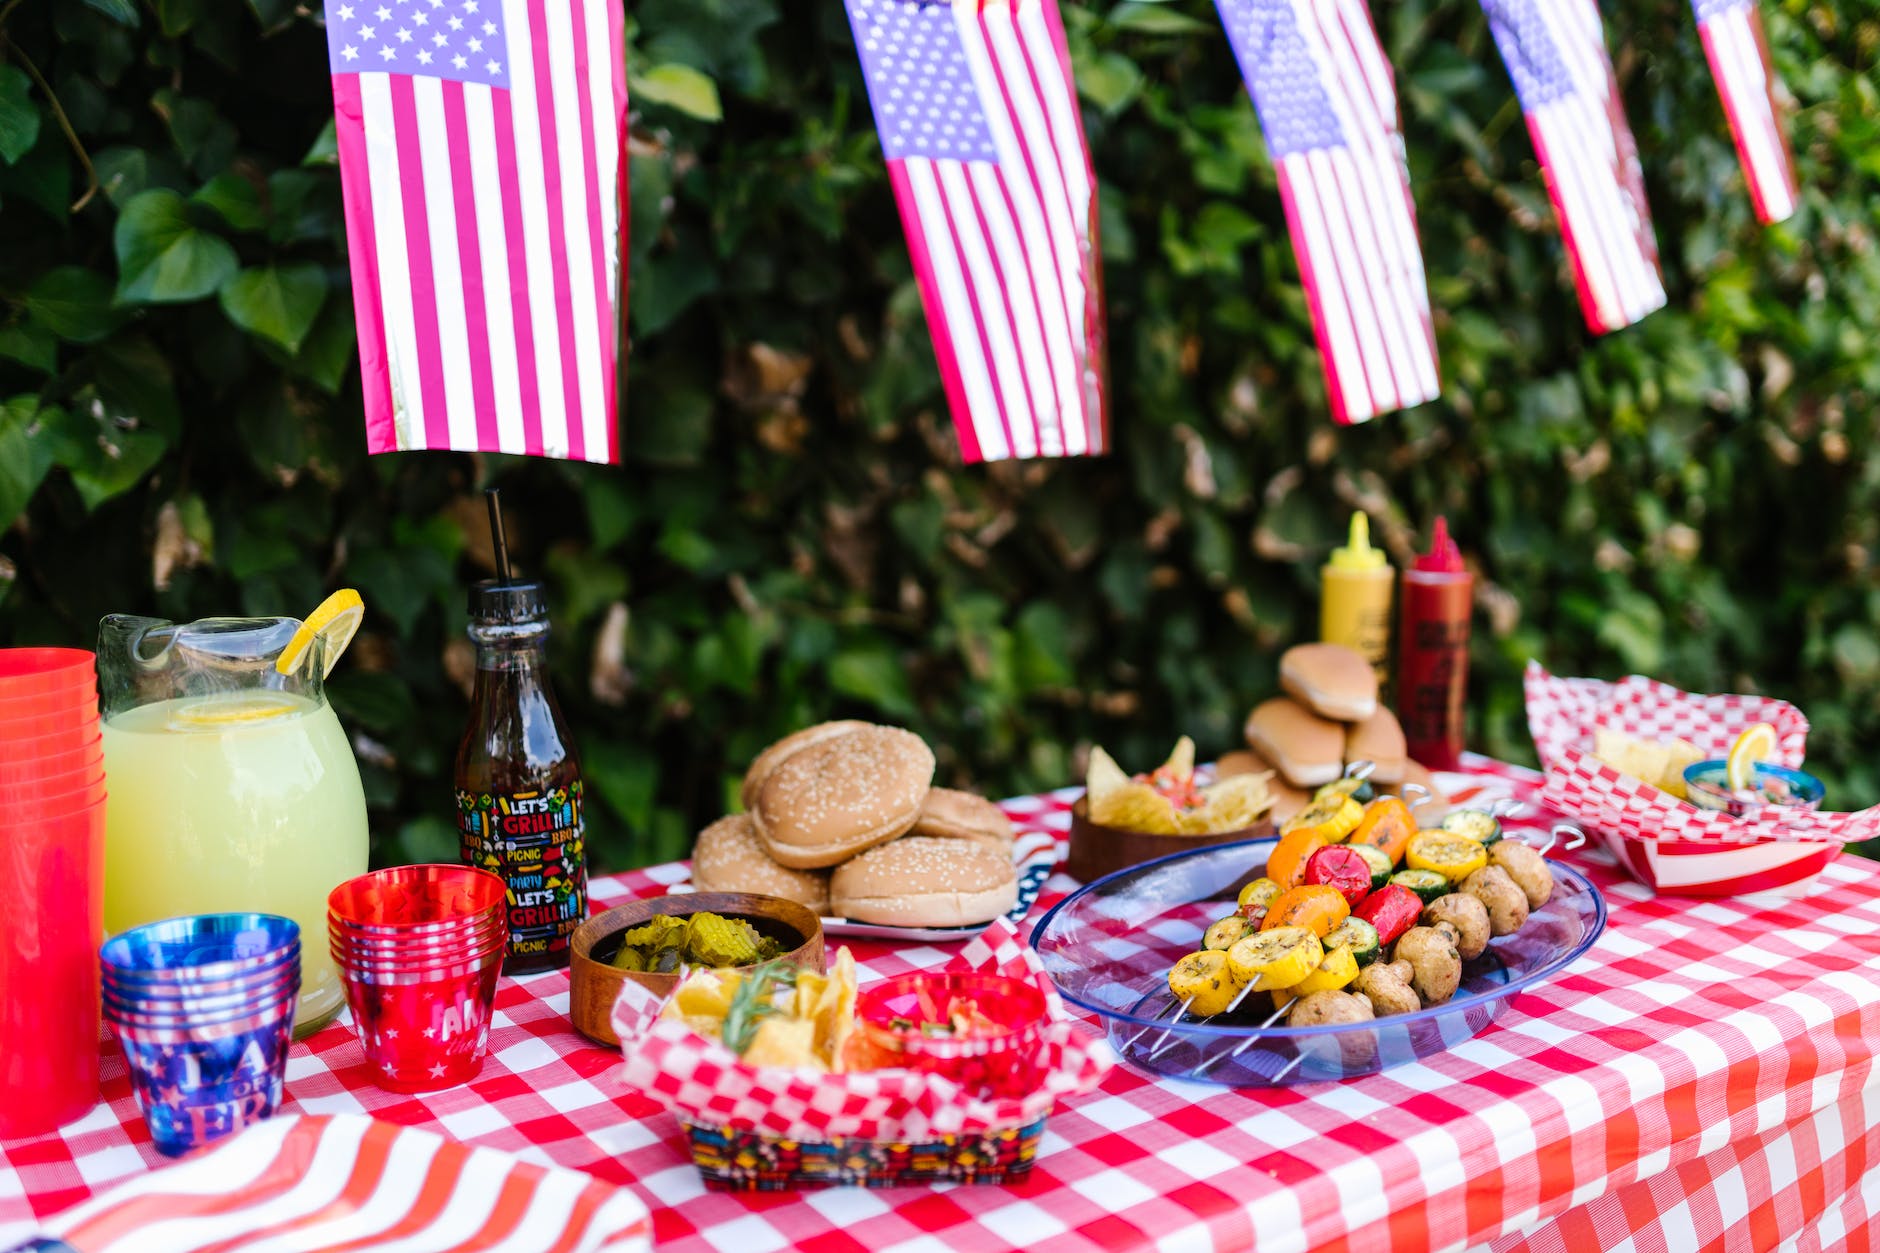 13 Delicious Side Dishes For The 4th of July